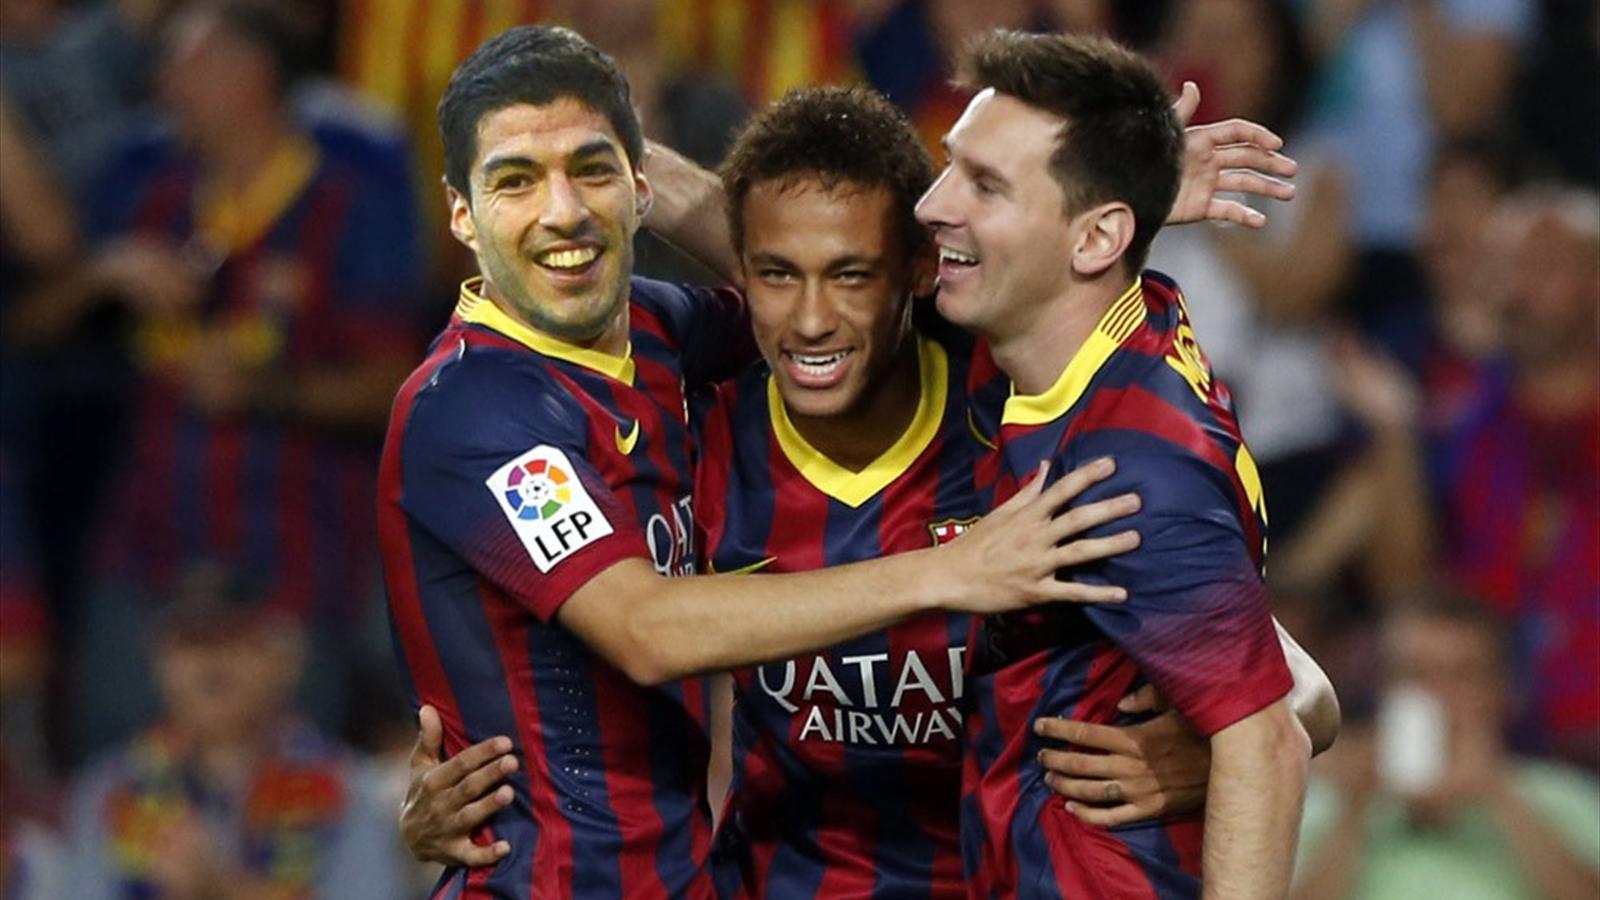 Luis Enrique is excited to see Messi Neymar and Suarez in action